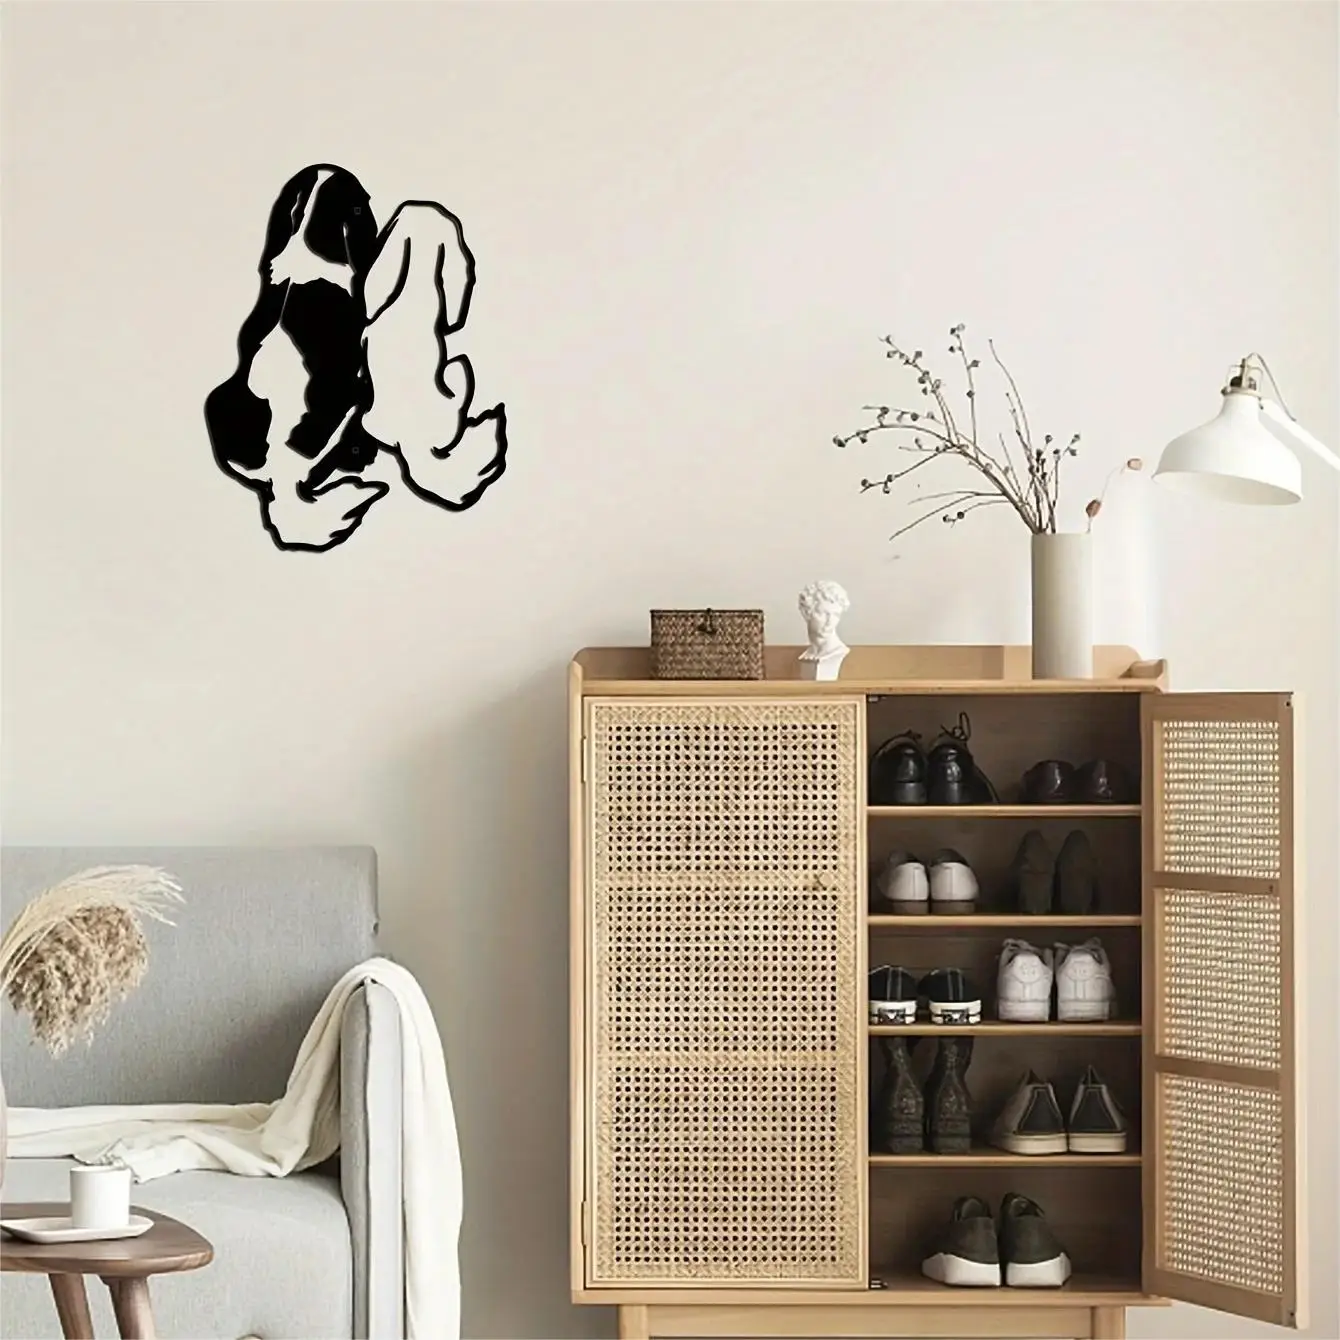 

Metal Cute Dog Wall Hanging Iron Art Silhouette Animal Minimalist Abstract Line Home Decor Create A Warm Atmosphere for Home